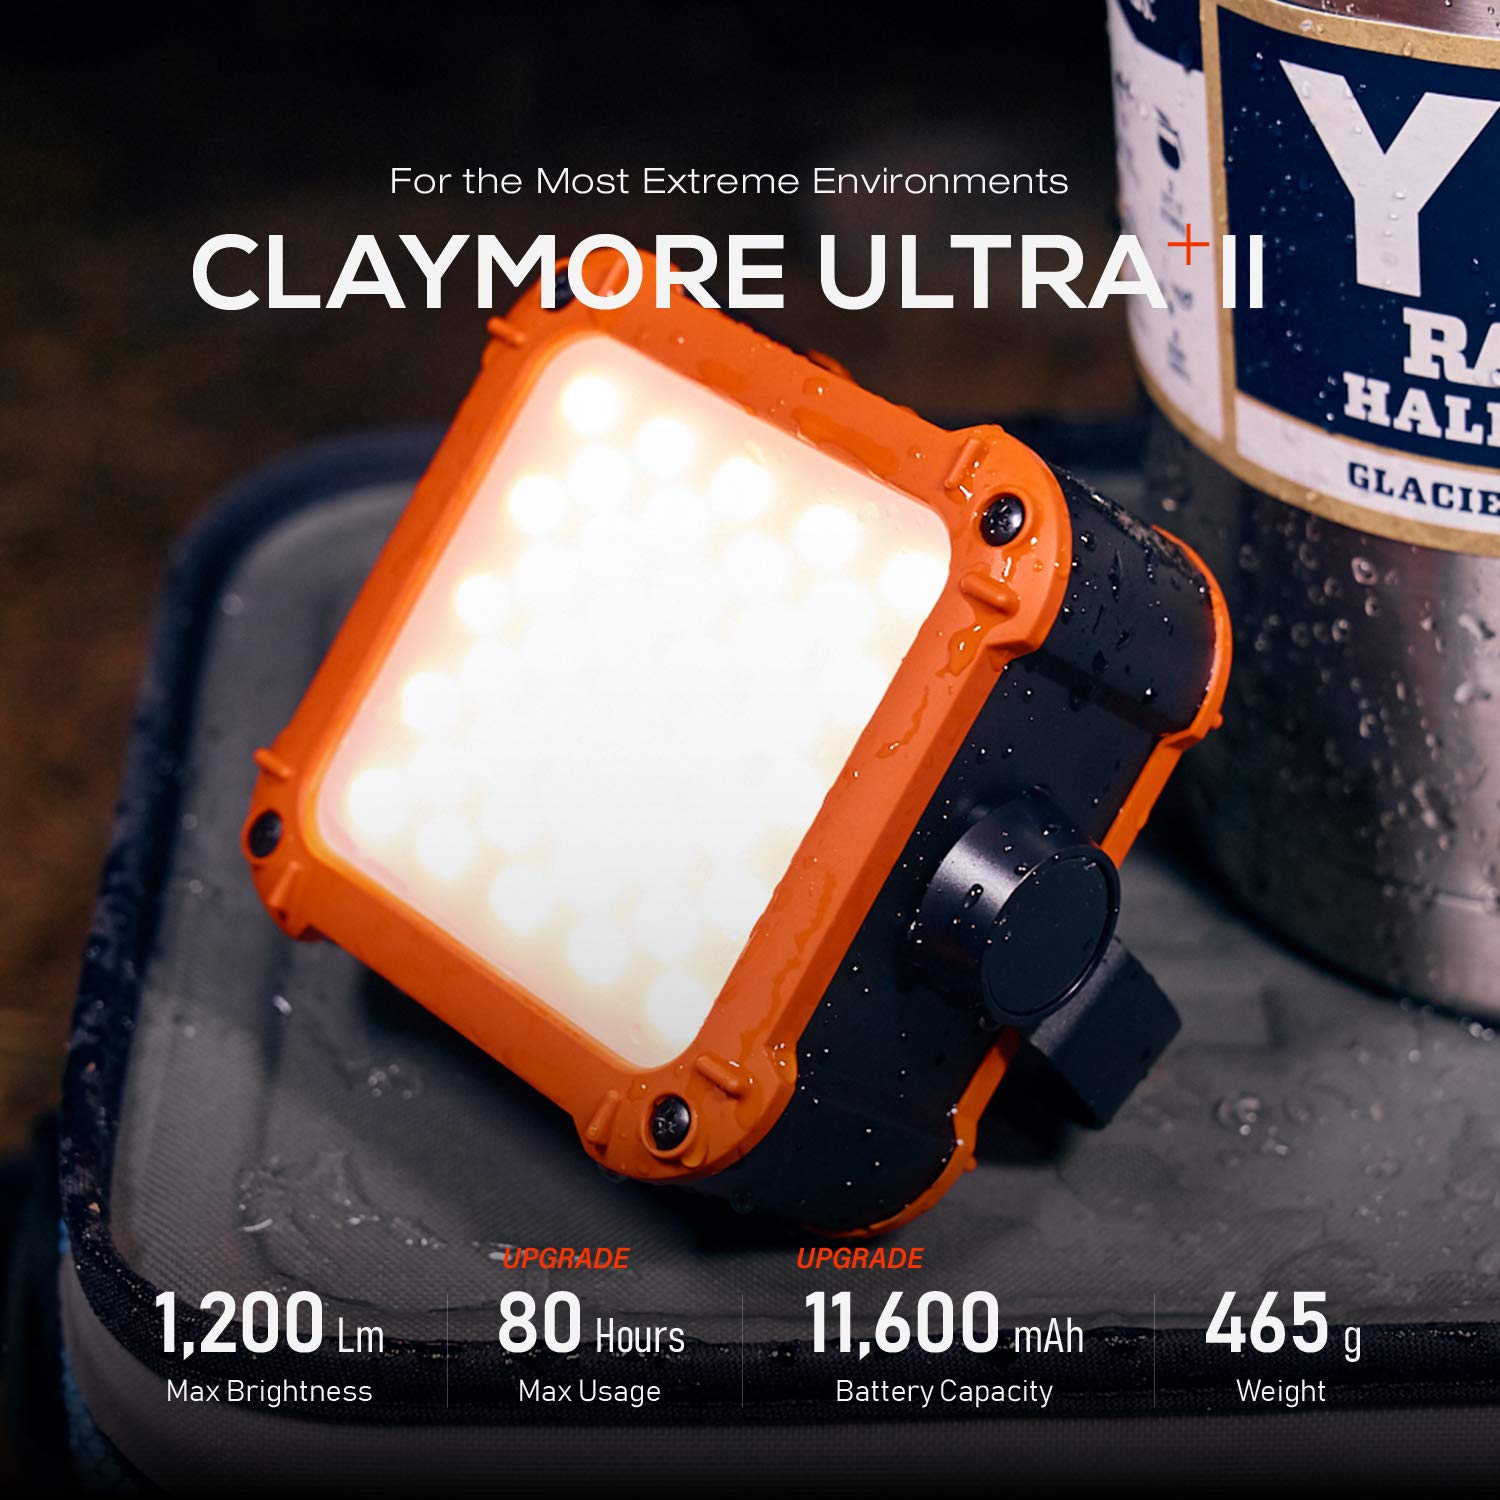 Claymore Ultra+2 Armored Area Light for Extreme Outdoor Environments 3 Colors USB Rechargeable IP65 Heavy Duty Lantern for Professional Camping Backpacking Construction Fishing